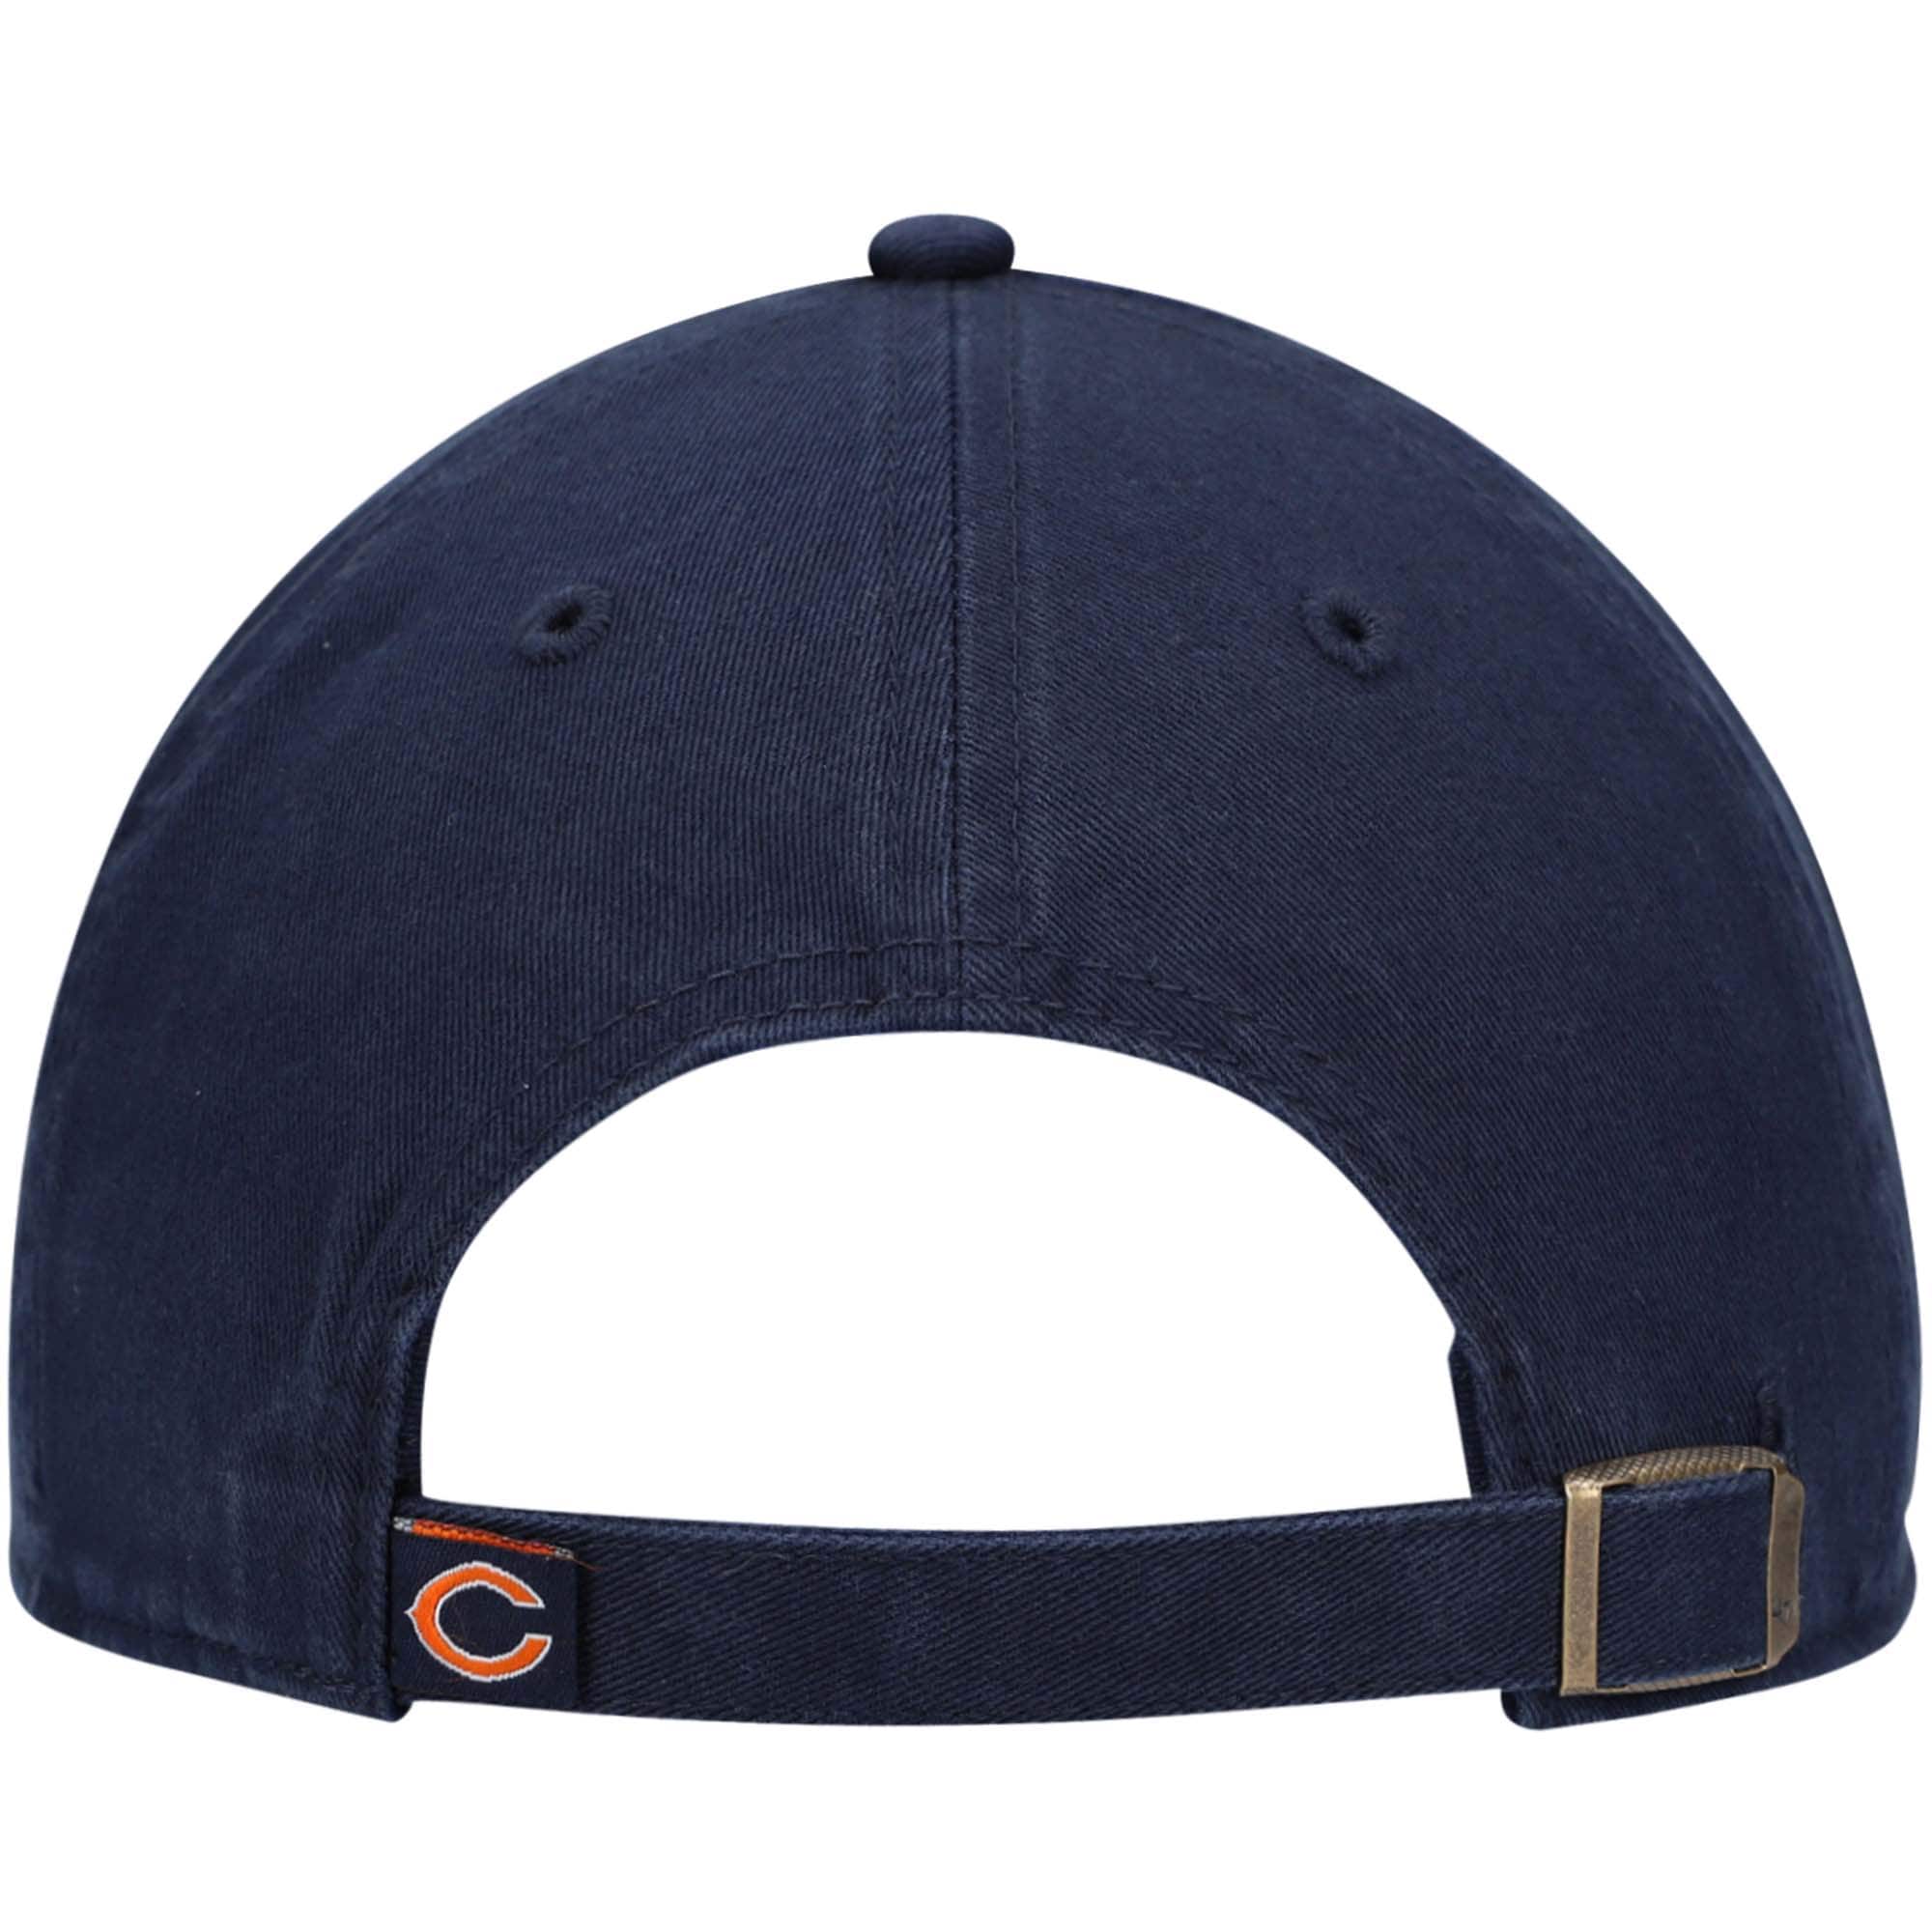 Women's '47 Navy Chicago Bears Vocal Clean Up Adjustable Hat - OSFA - image 4 of 4